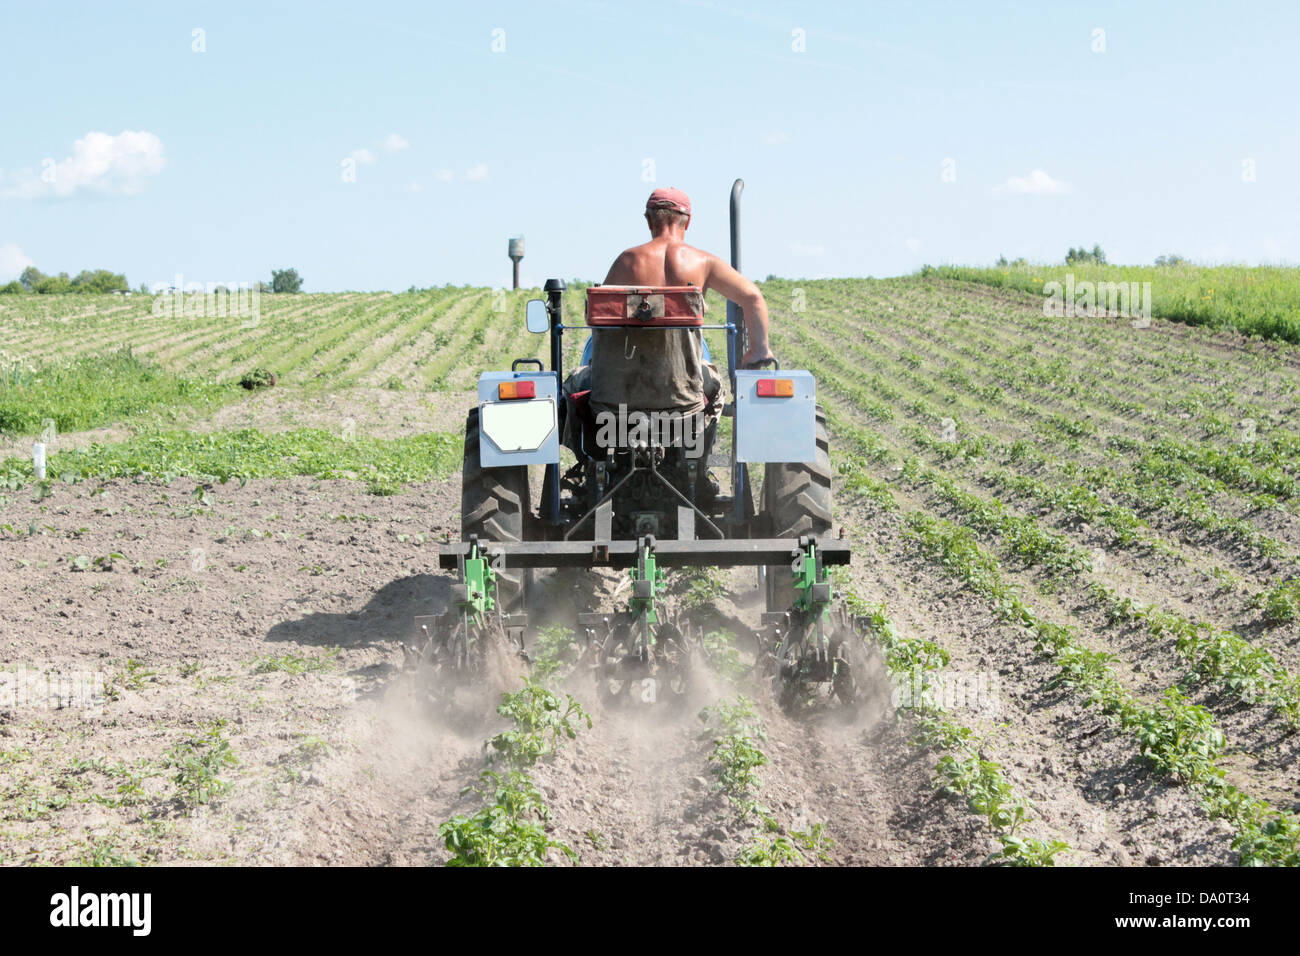 image of special equipment on a tractor for weed in agriculture Stock Photo